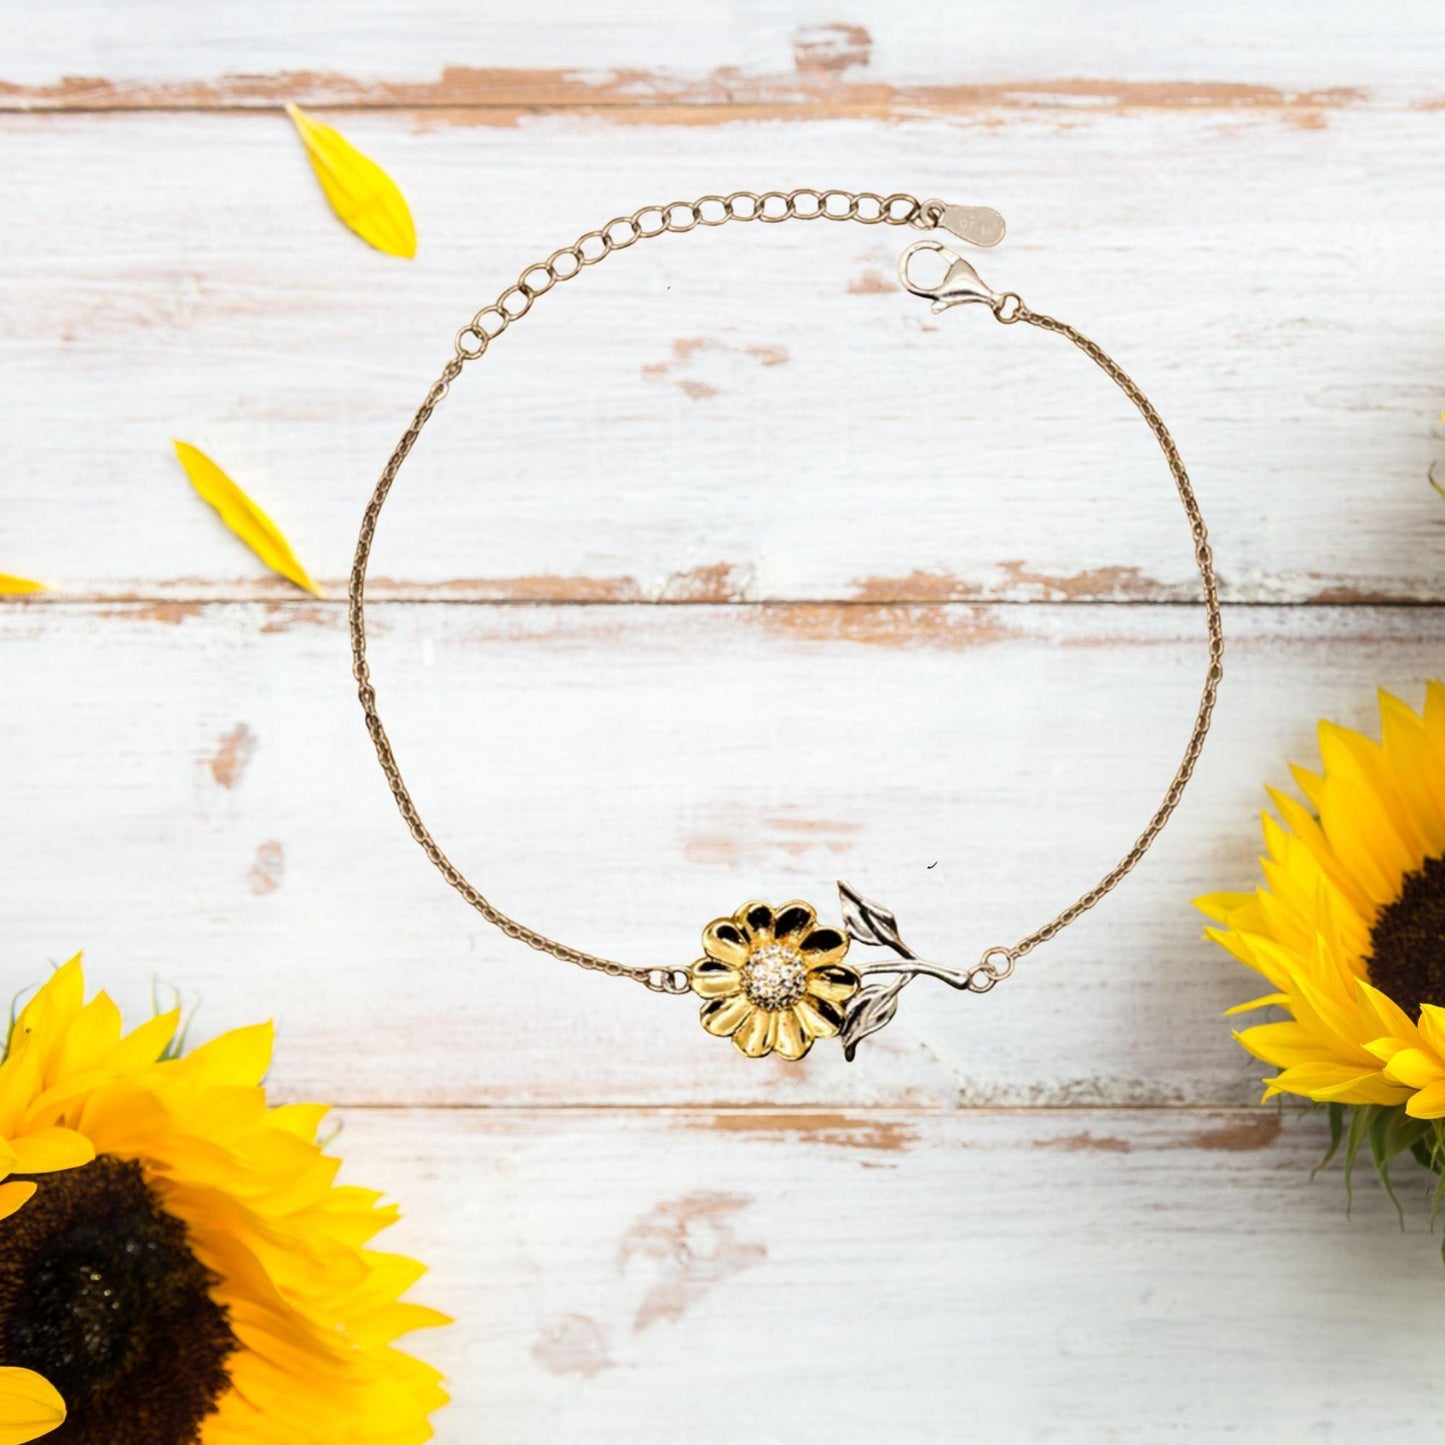 Remarkable Musician Gifts, Your dedication and hard work, Inspirational Birthday Christmas Unique Sunflower Bracelet For Musician, Coworkers, Men, Women, Friends - Mallard Moon Gift Shop